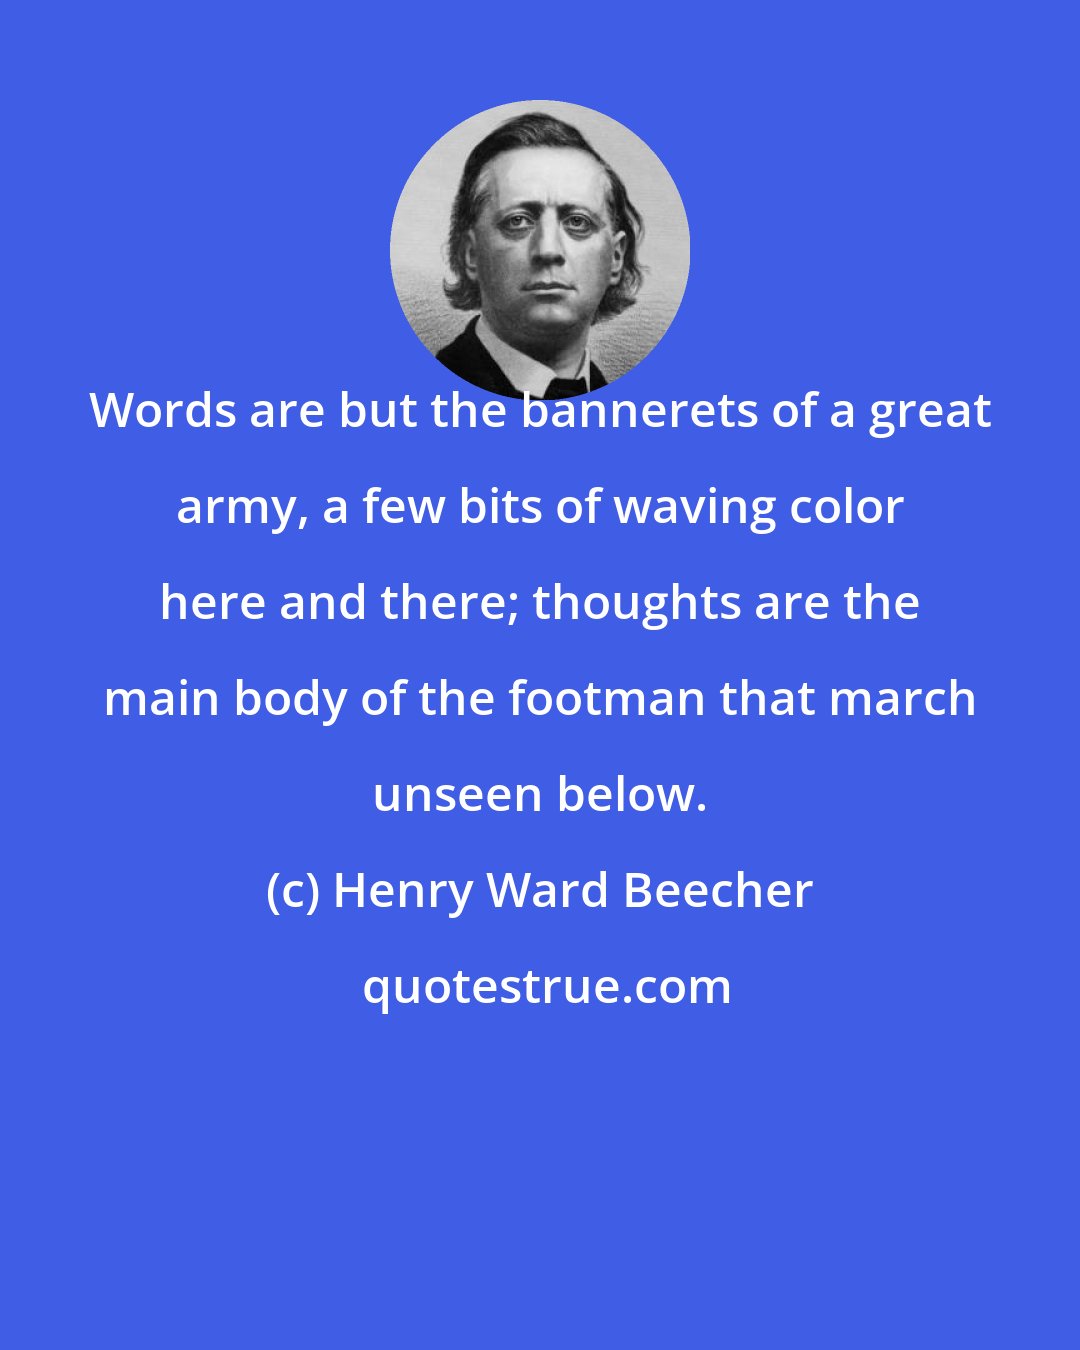 Henry Ward Beecher: Words are but the bannerets of a great army, a few bits of waving color here and there; thoughts are the main body of the footman that march unseen below.